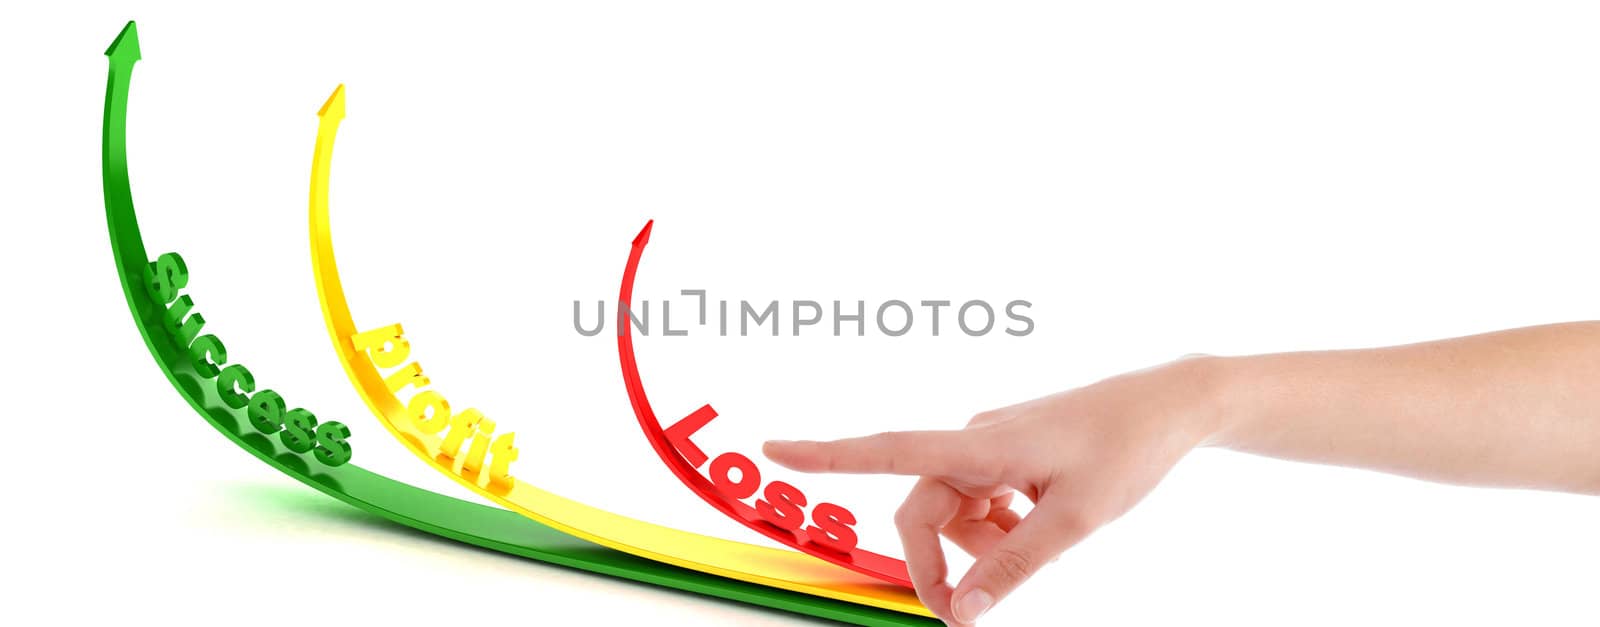 pointing hand gesture with 
three dimensional profit and loss arrows